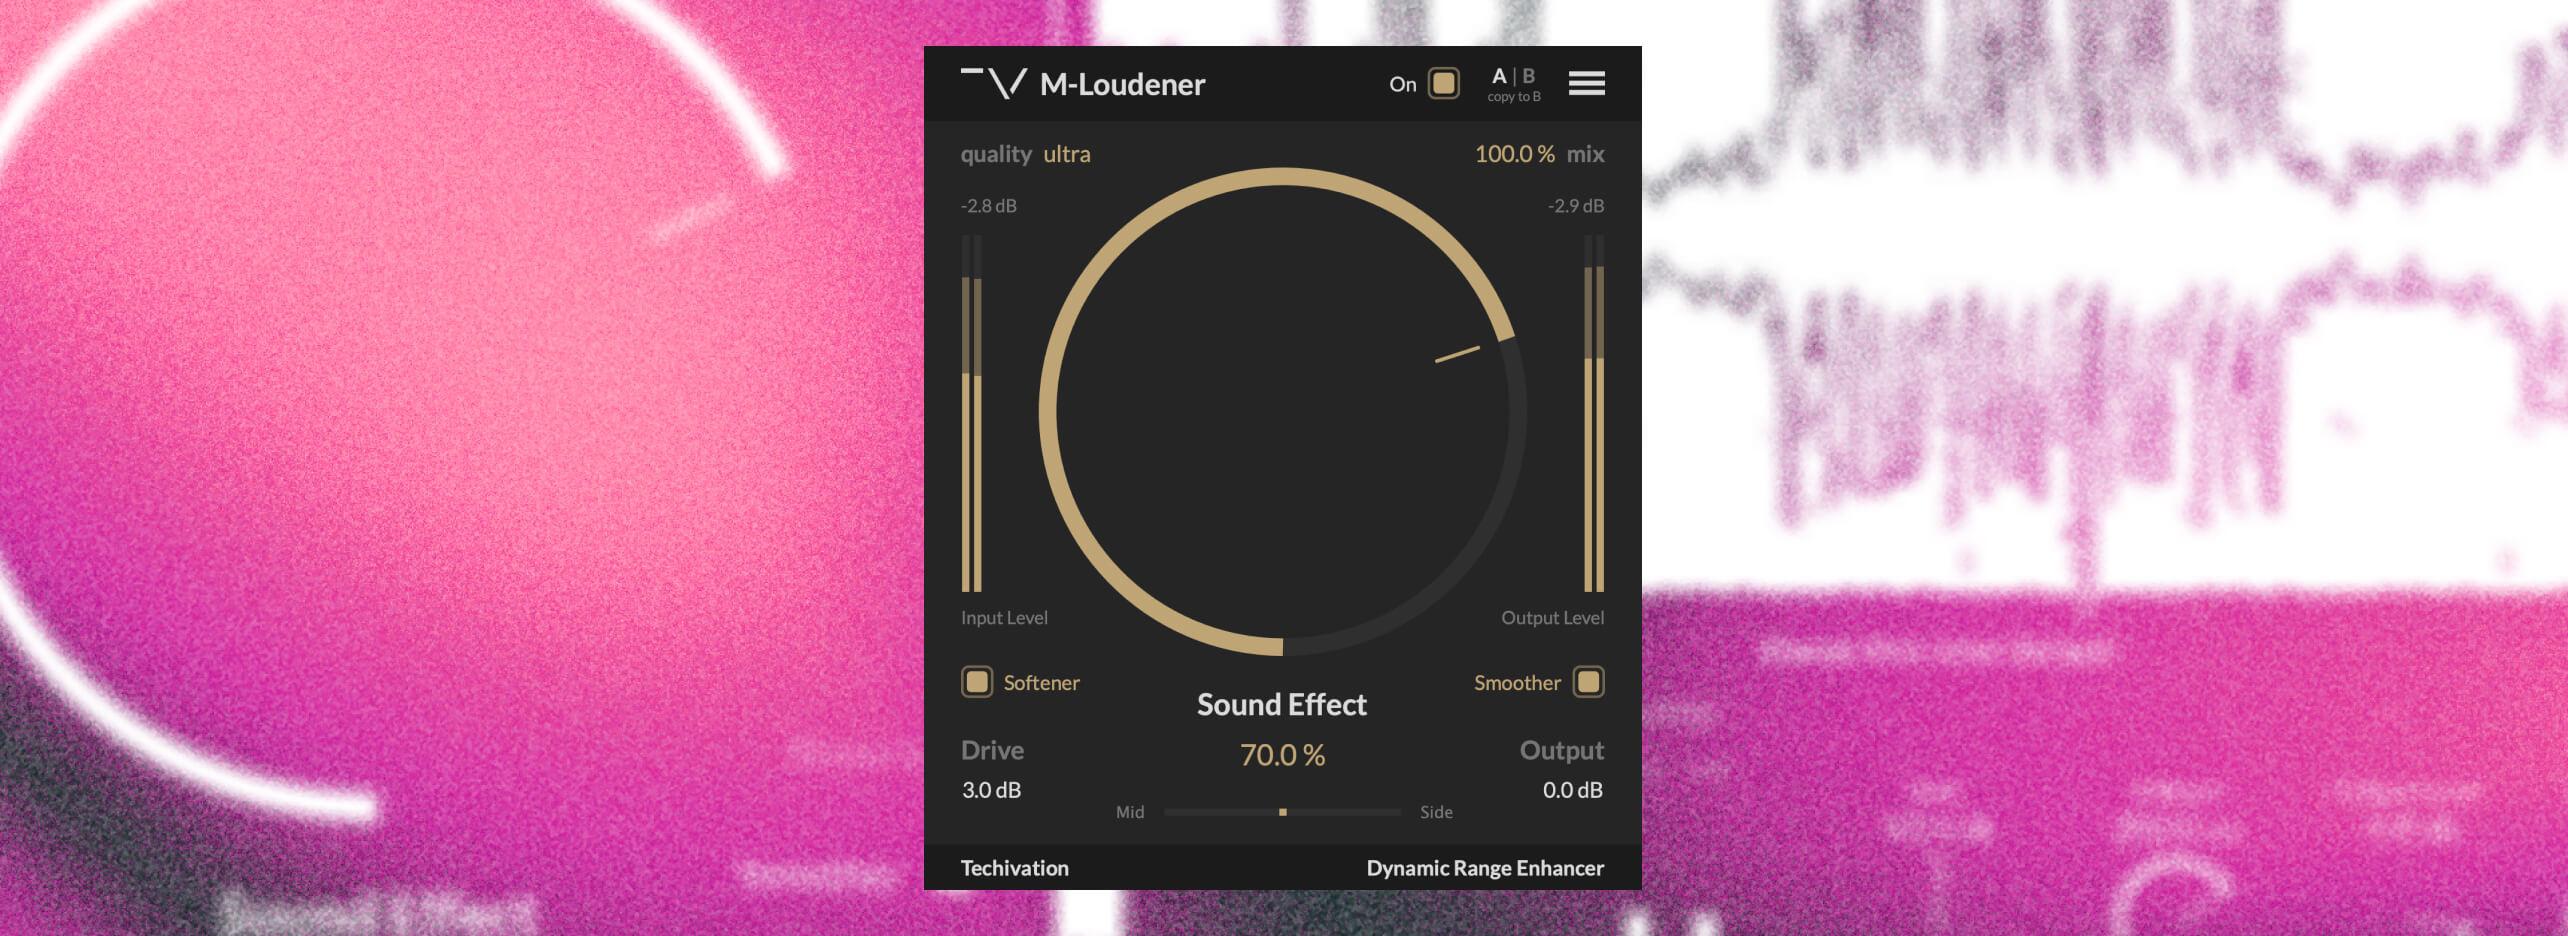 Better Audio Mastering with M-Loudener:3 Helpful Tips